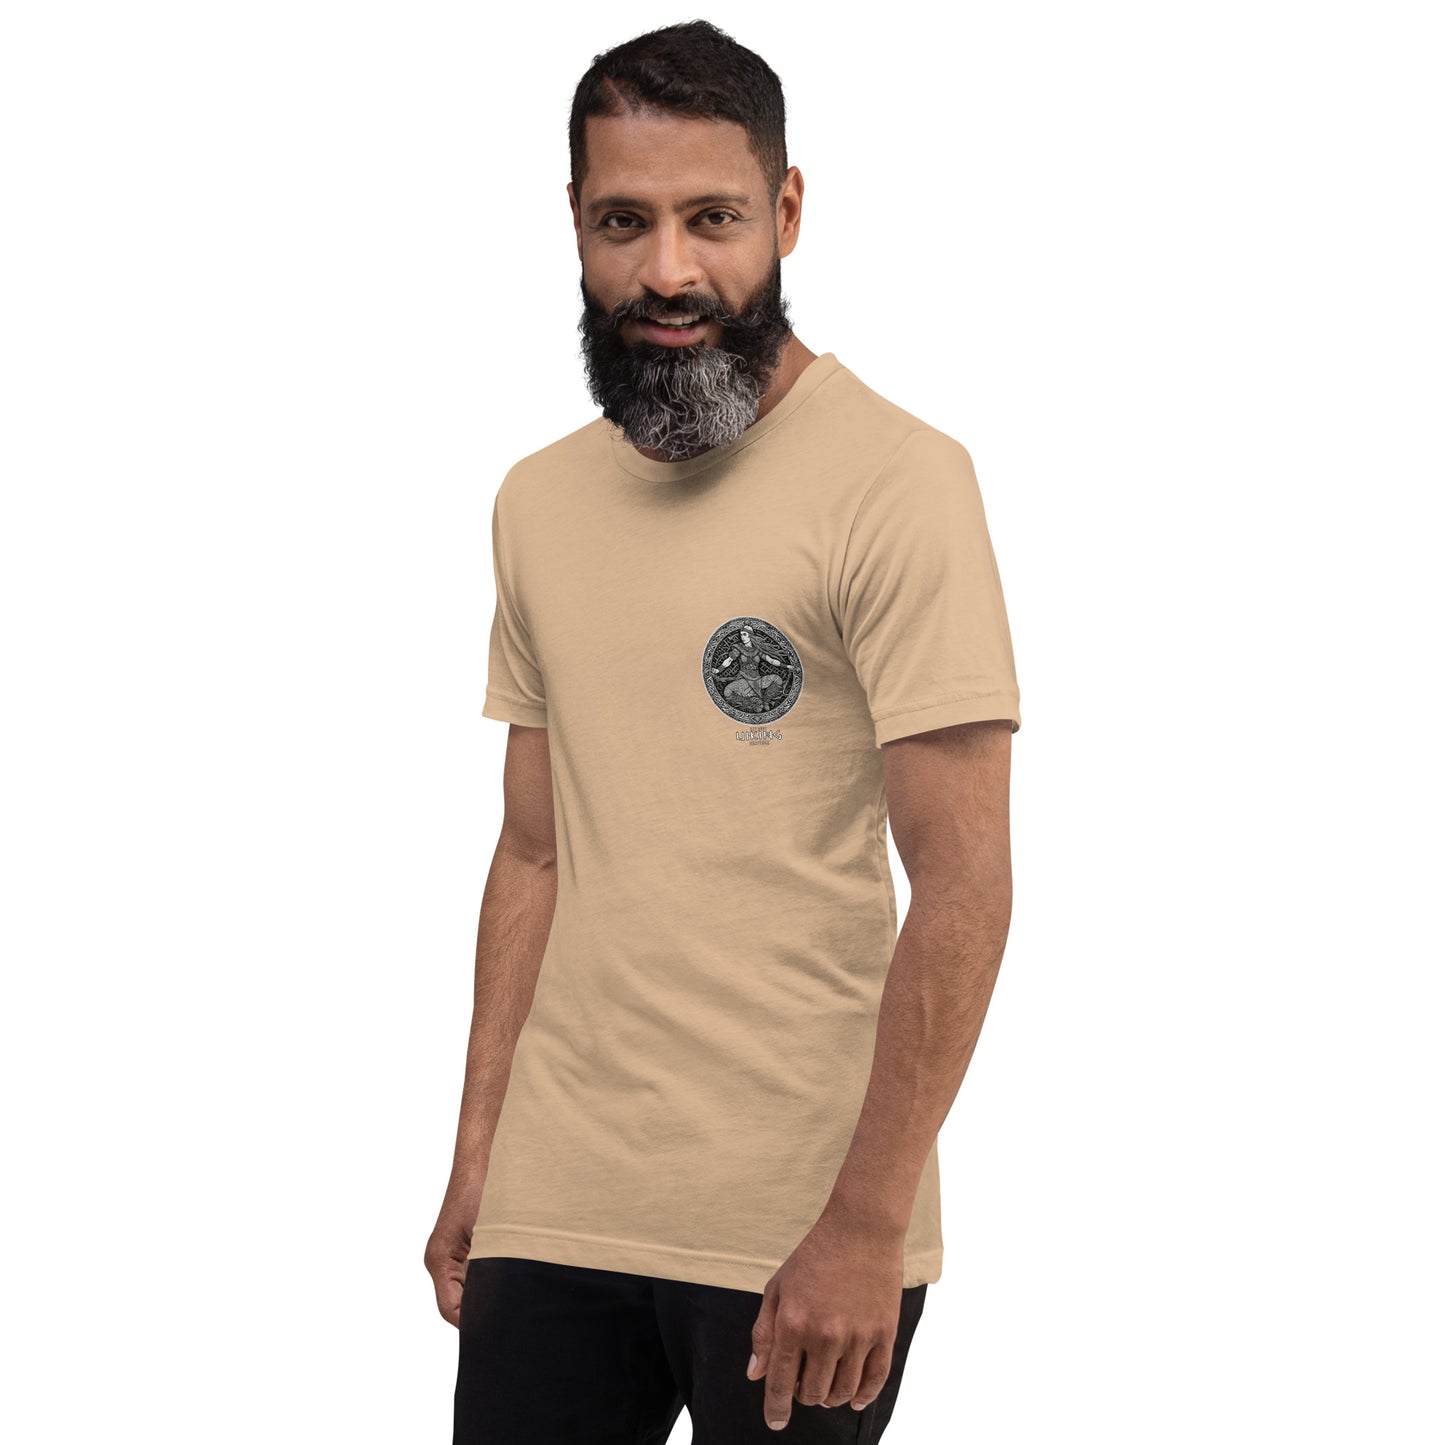 Norse Knotwork Valkyrie T-Shirt